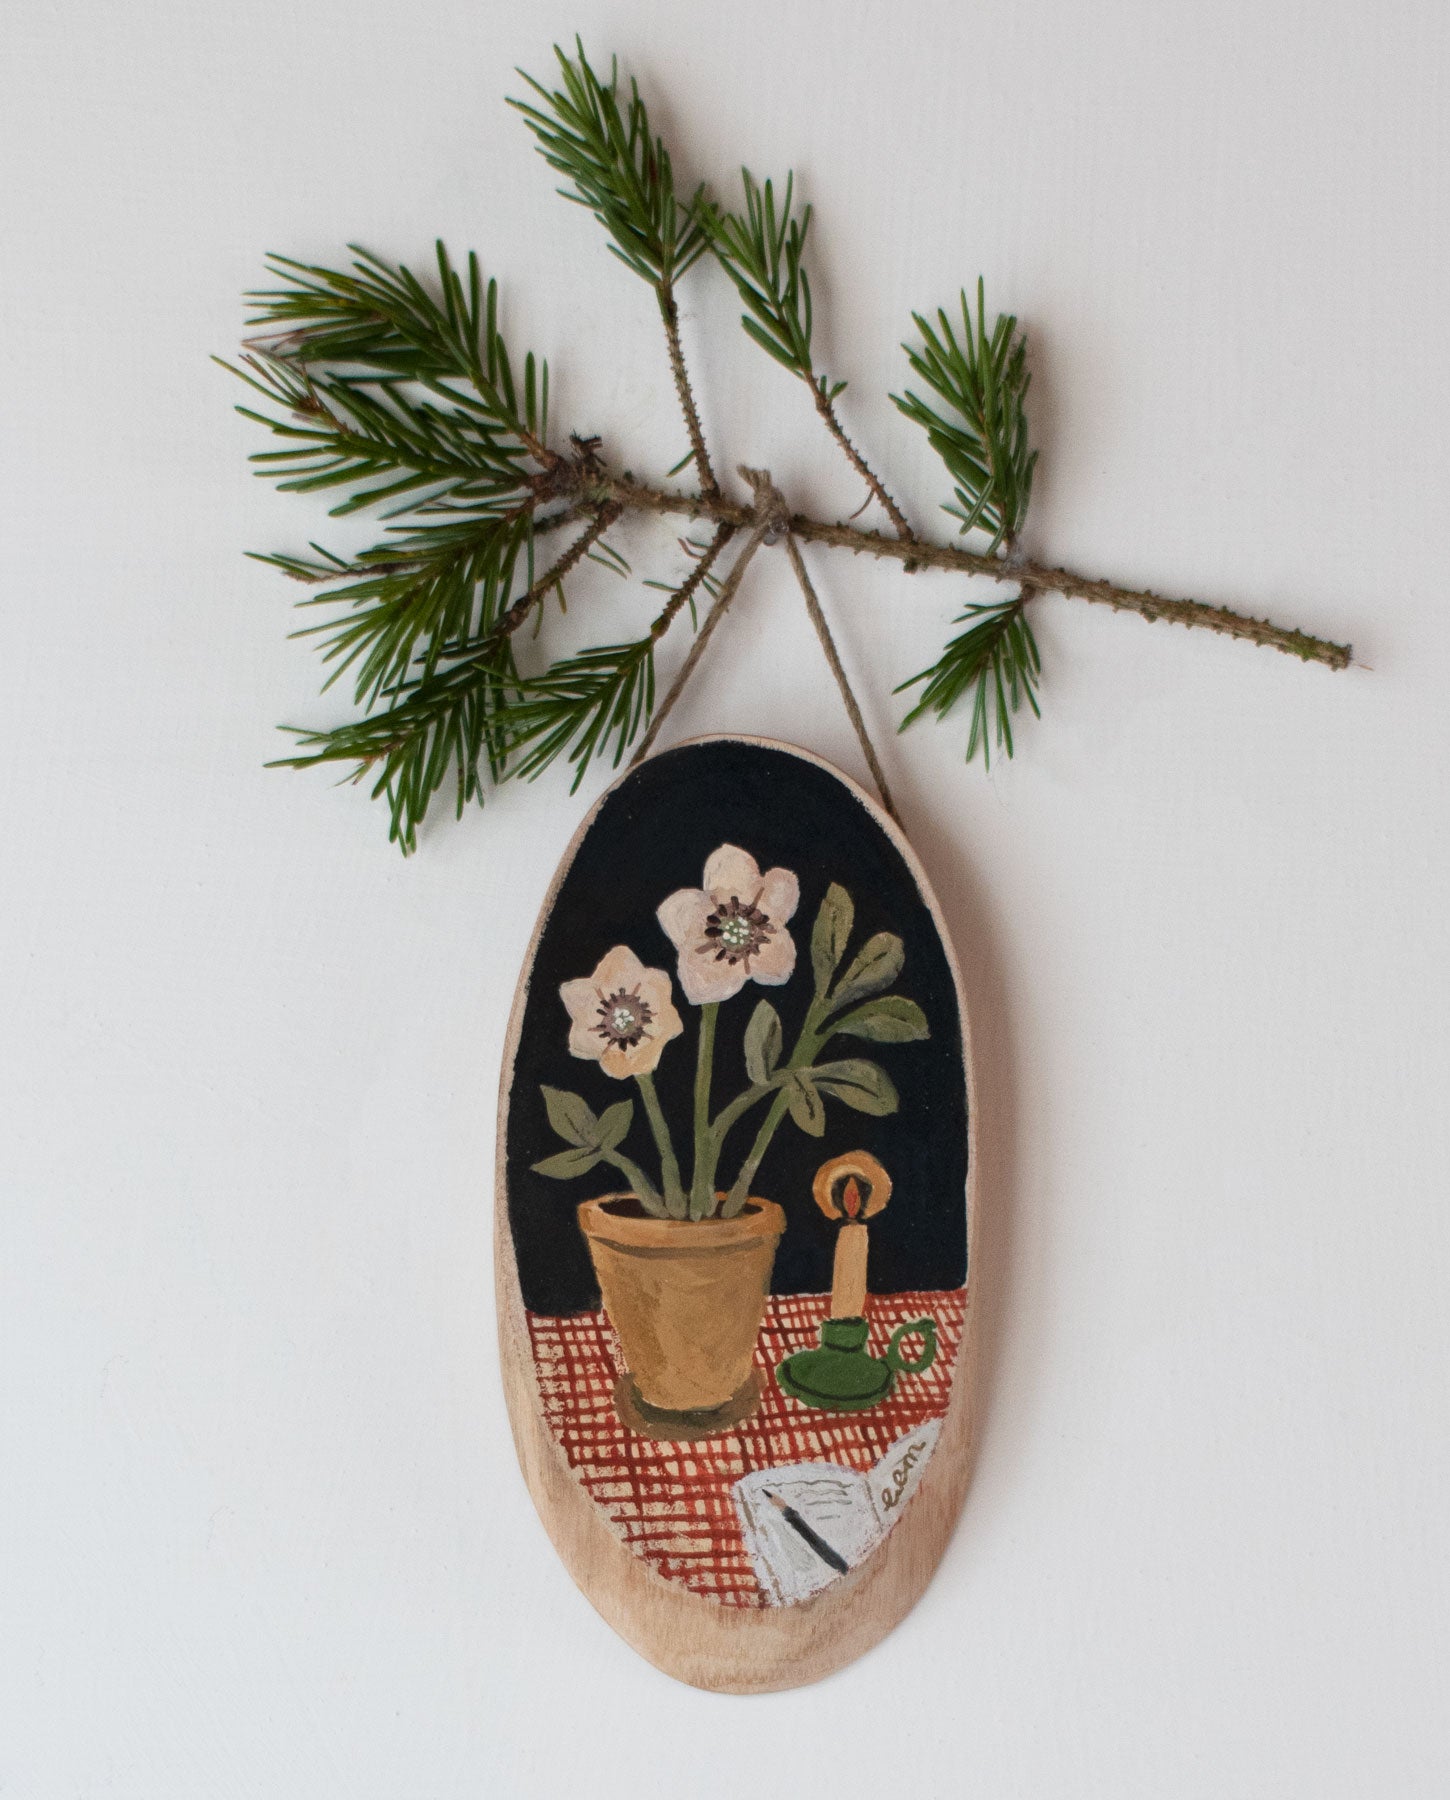 Hellebore and Candle - original miniature painting on a wooden slice